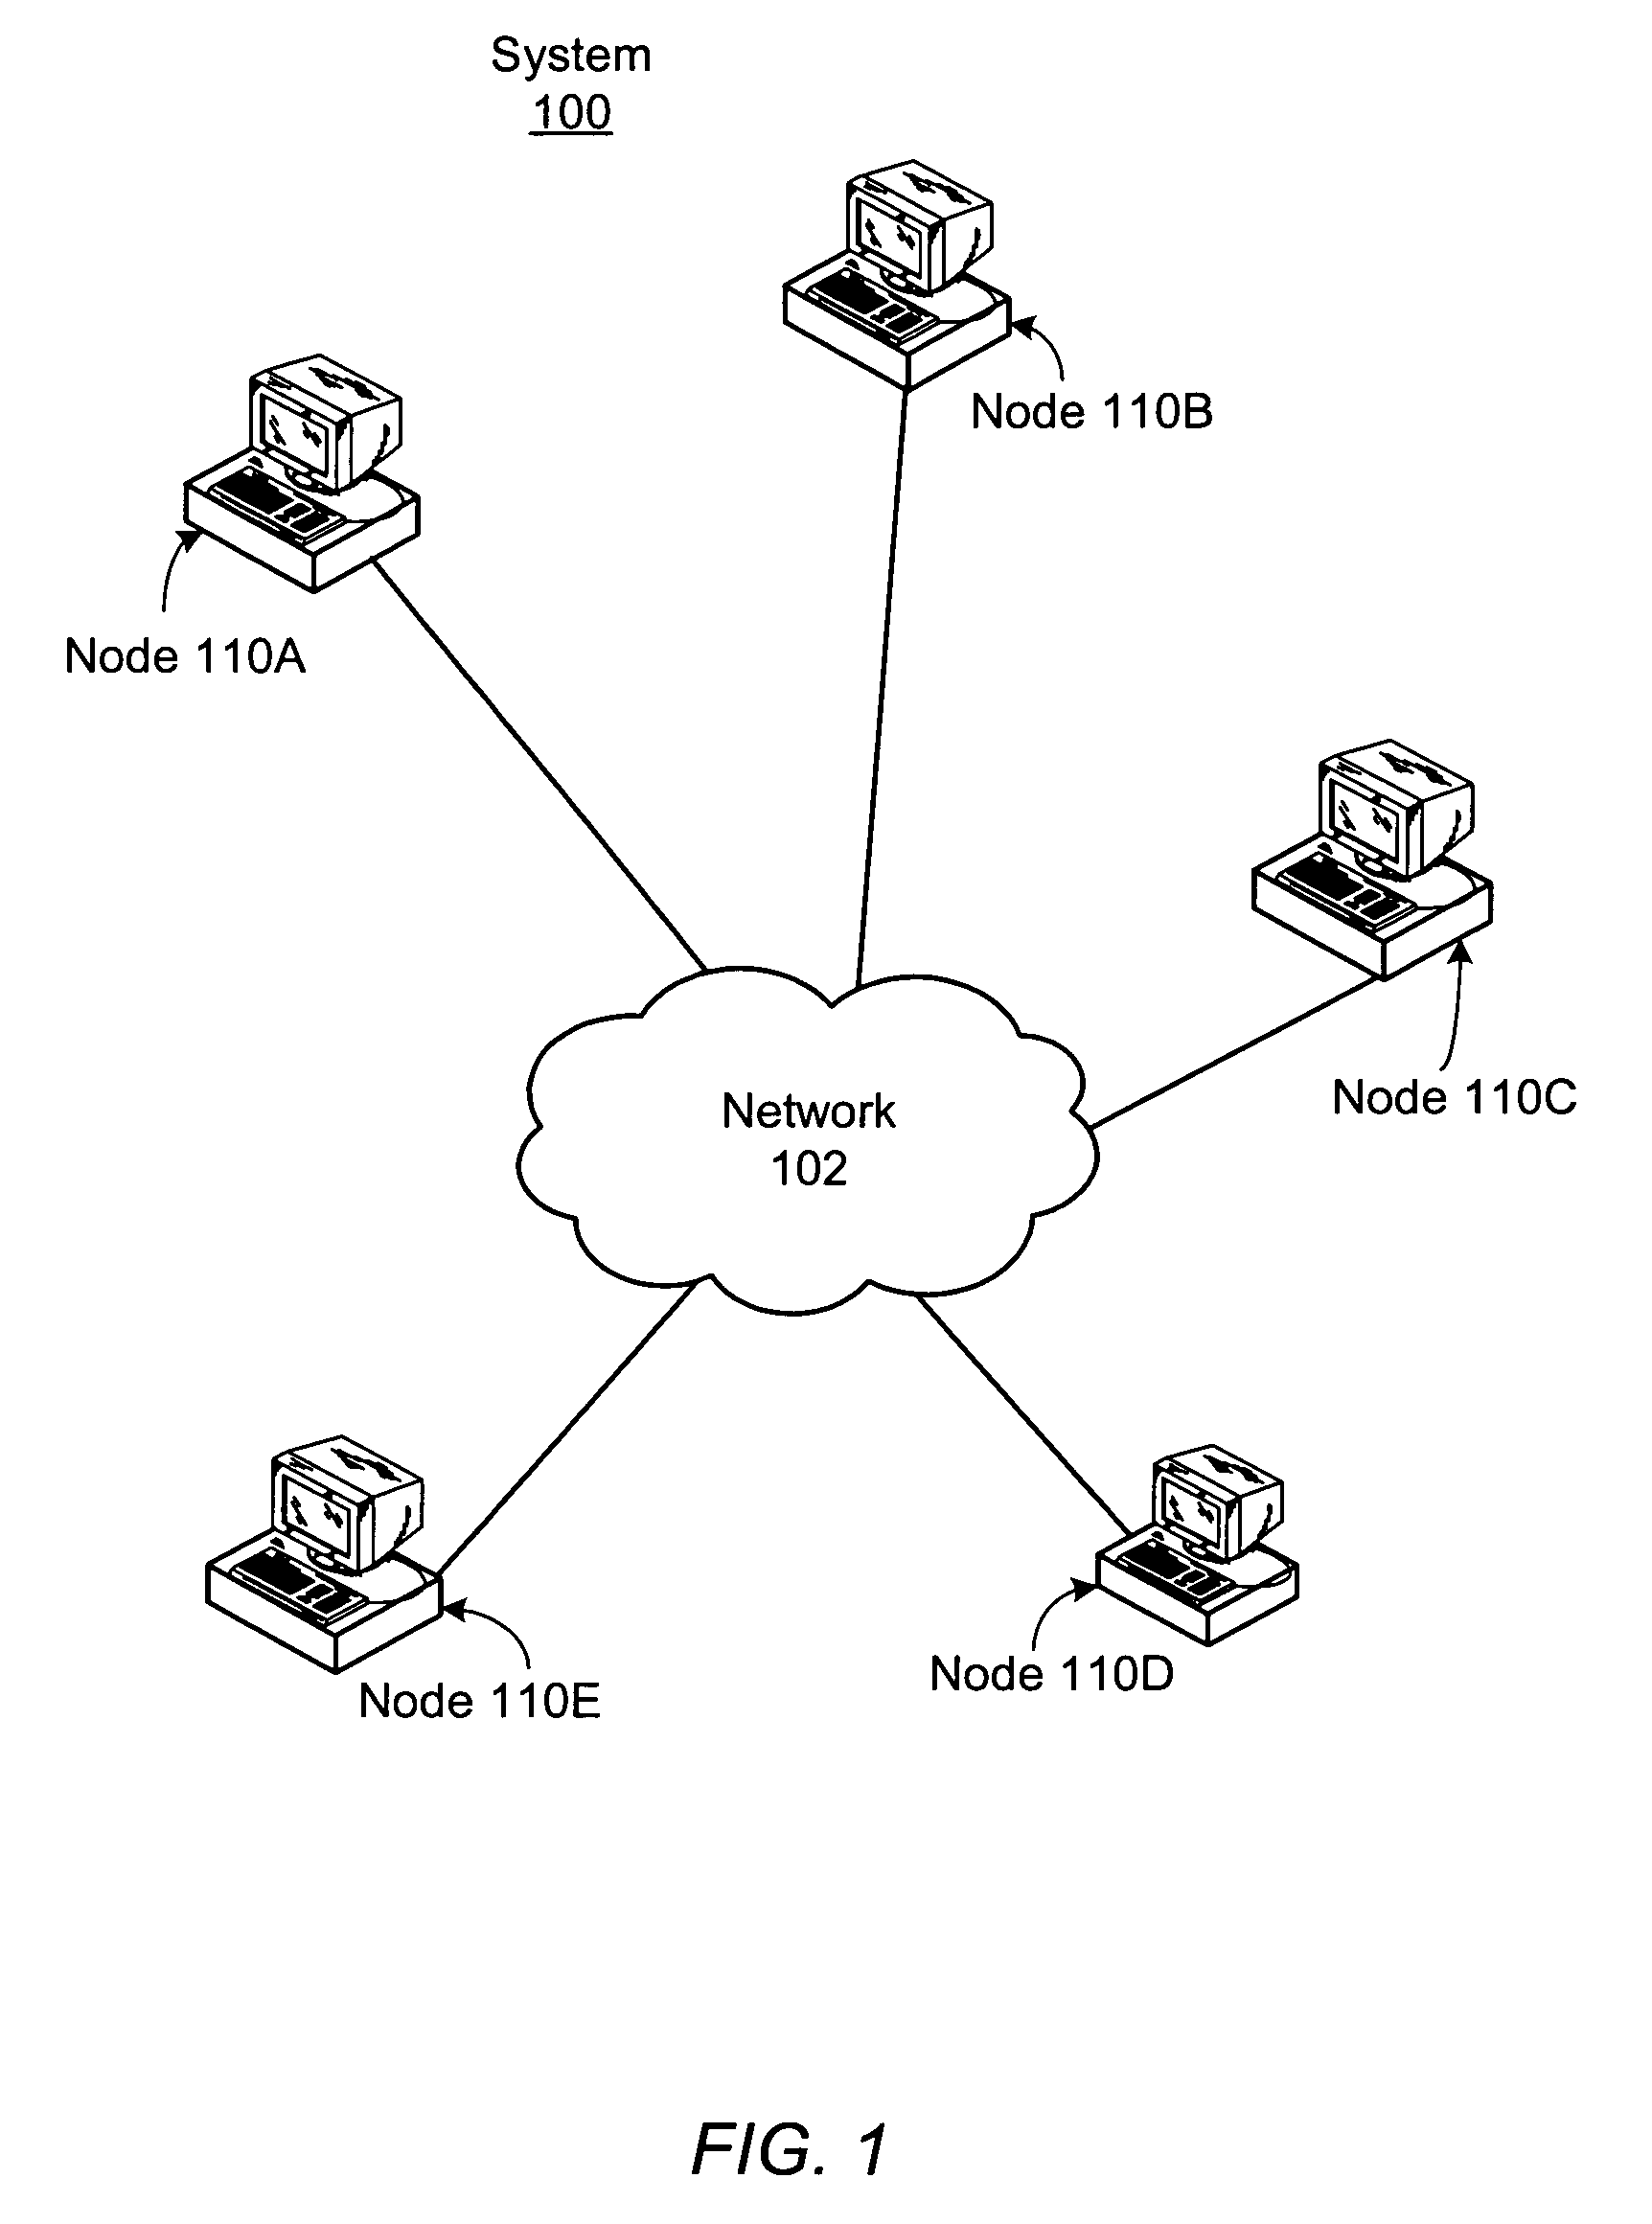 Coherency of replicas for a distributed file sharing system